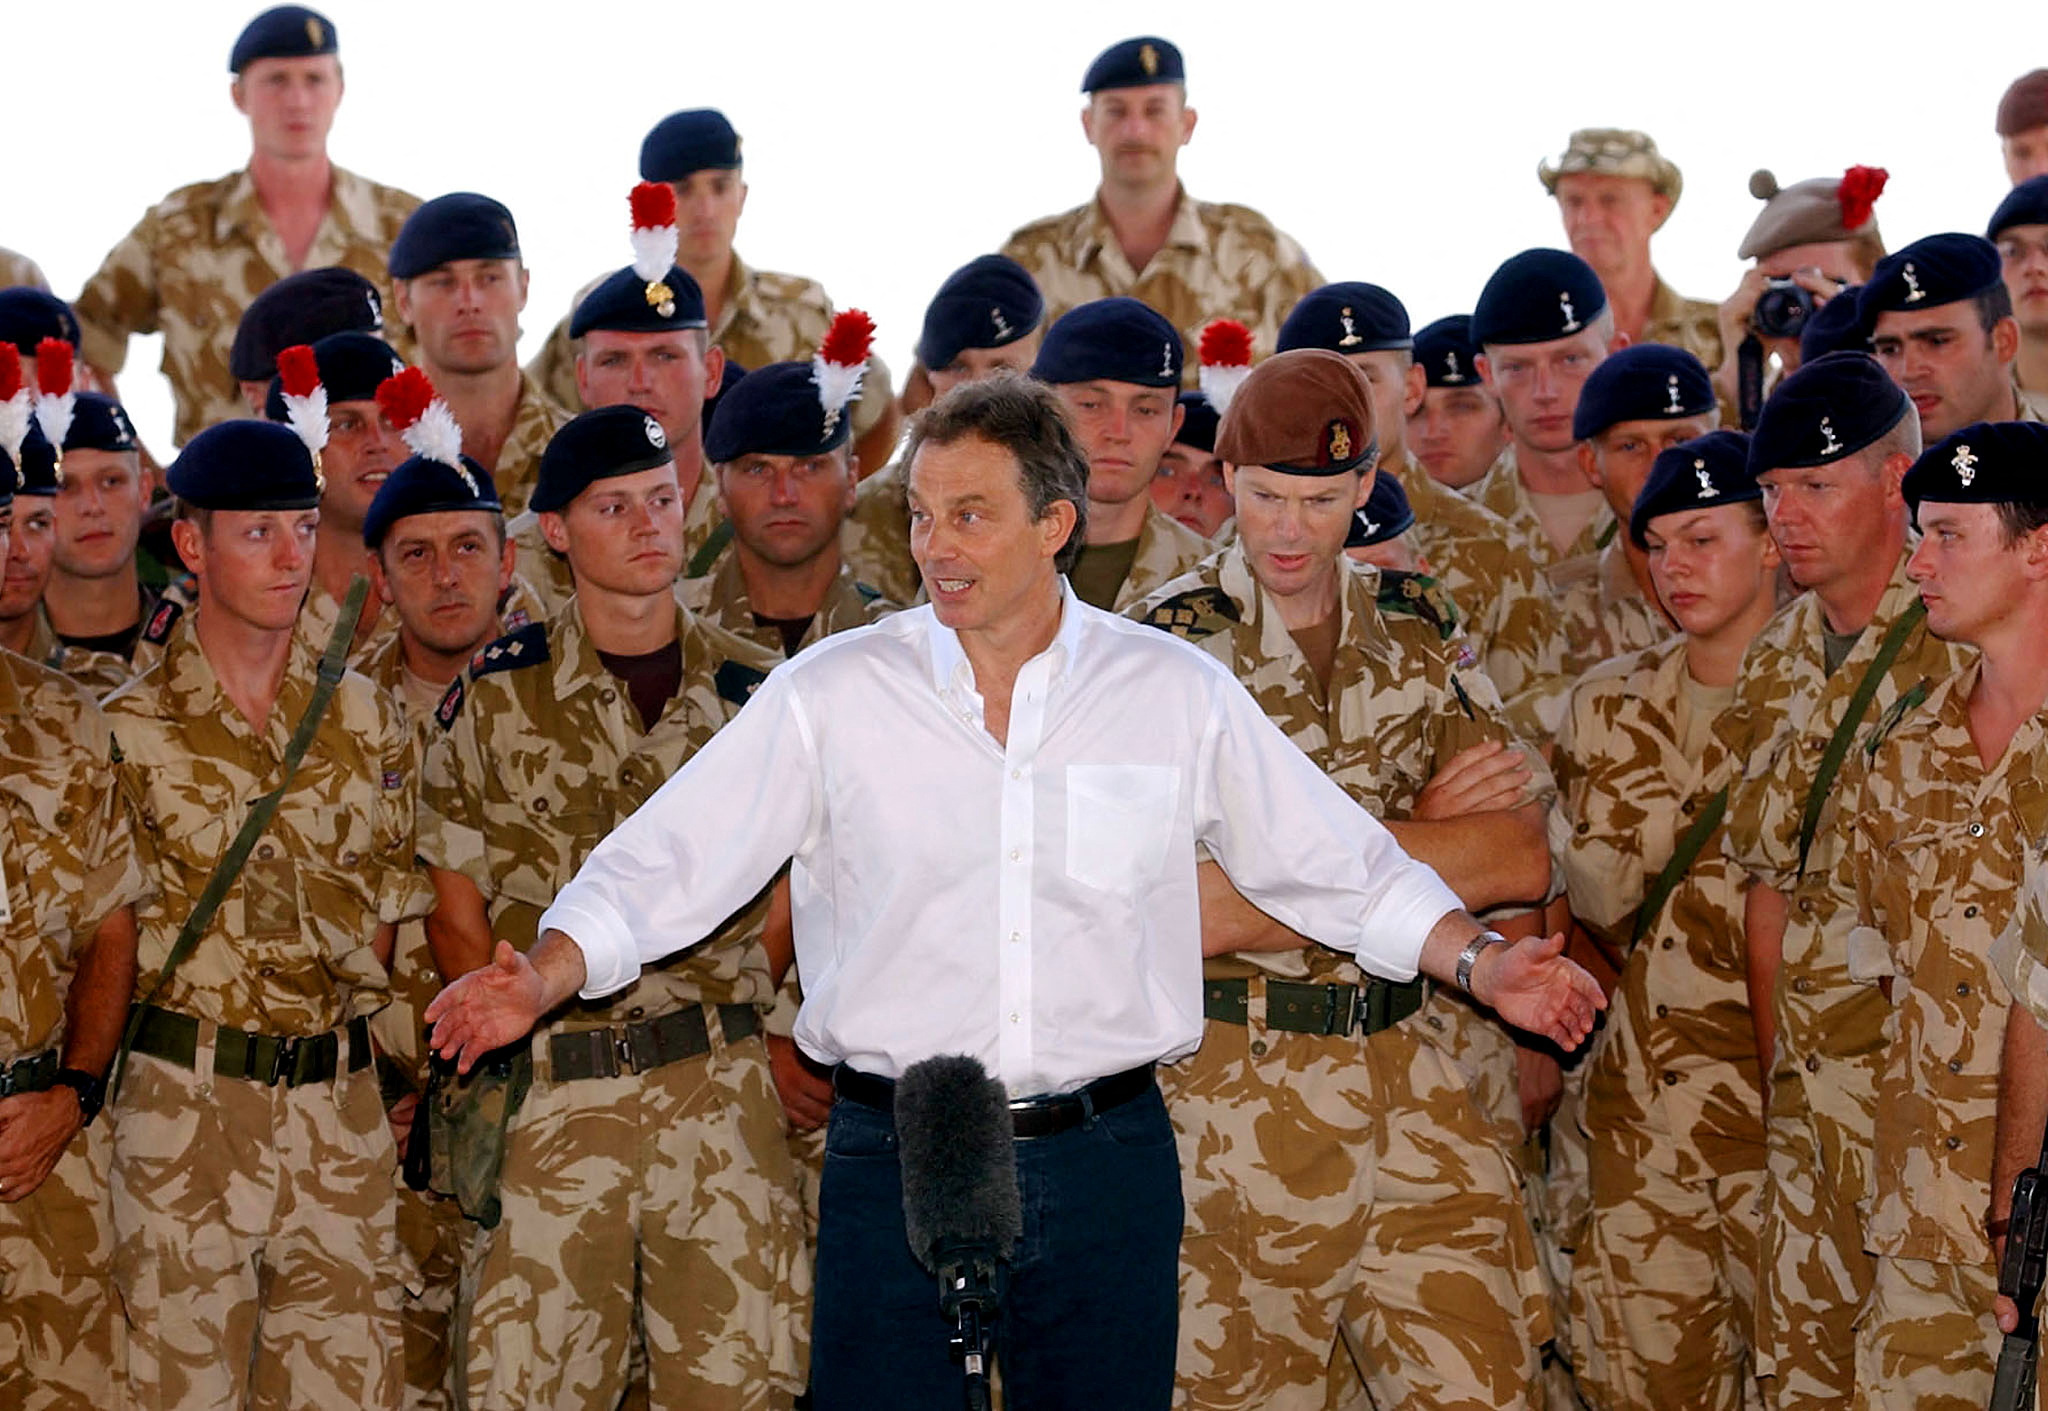 Britain's then Prime Minister Tony Blair addresses British troops in Basra, southern Iraq, in 2003. /Pool via Reuters